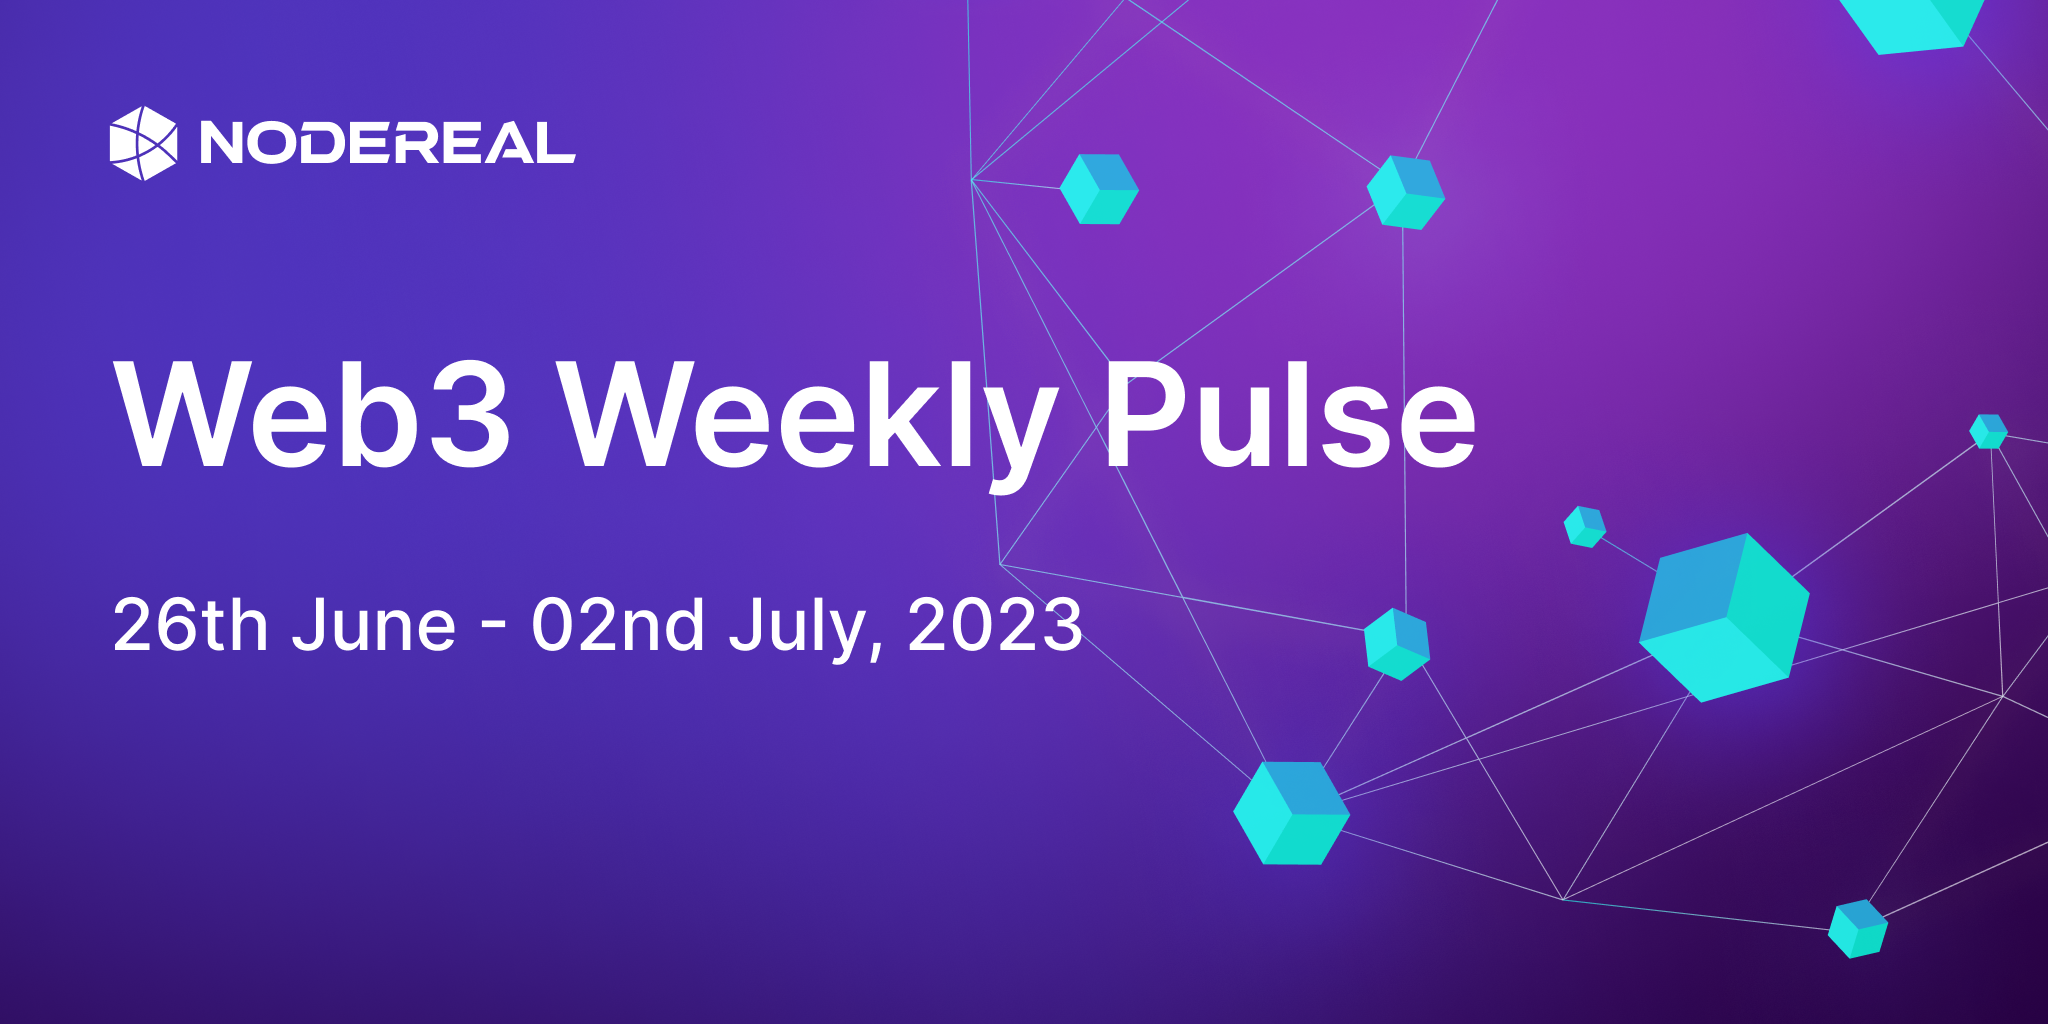 Web3 Weekly Pulse: 26th June - 02nd July